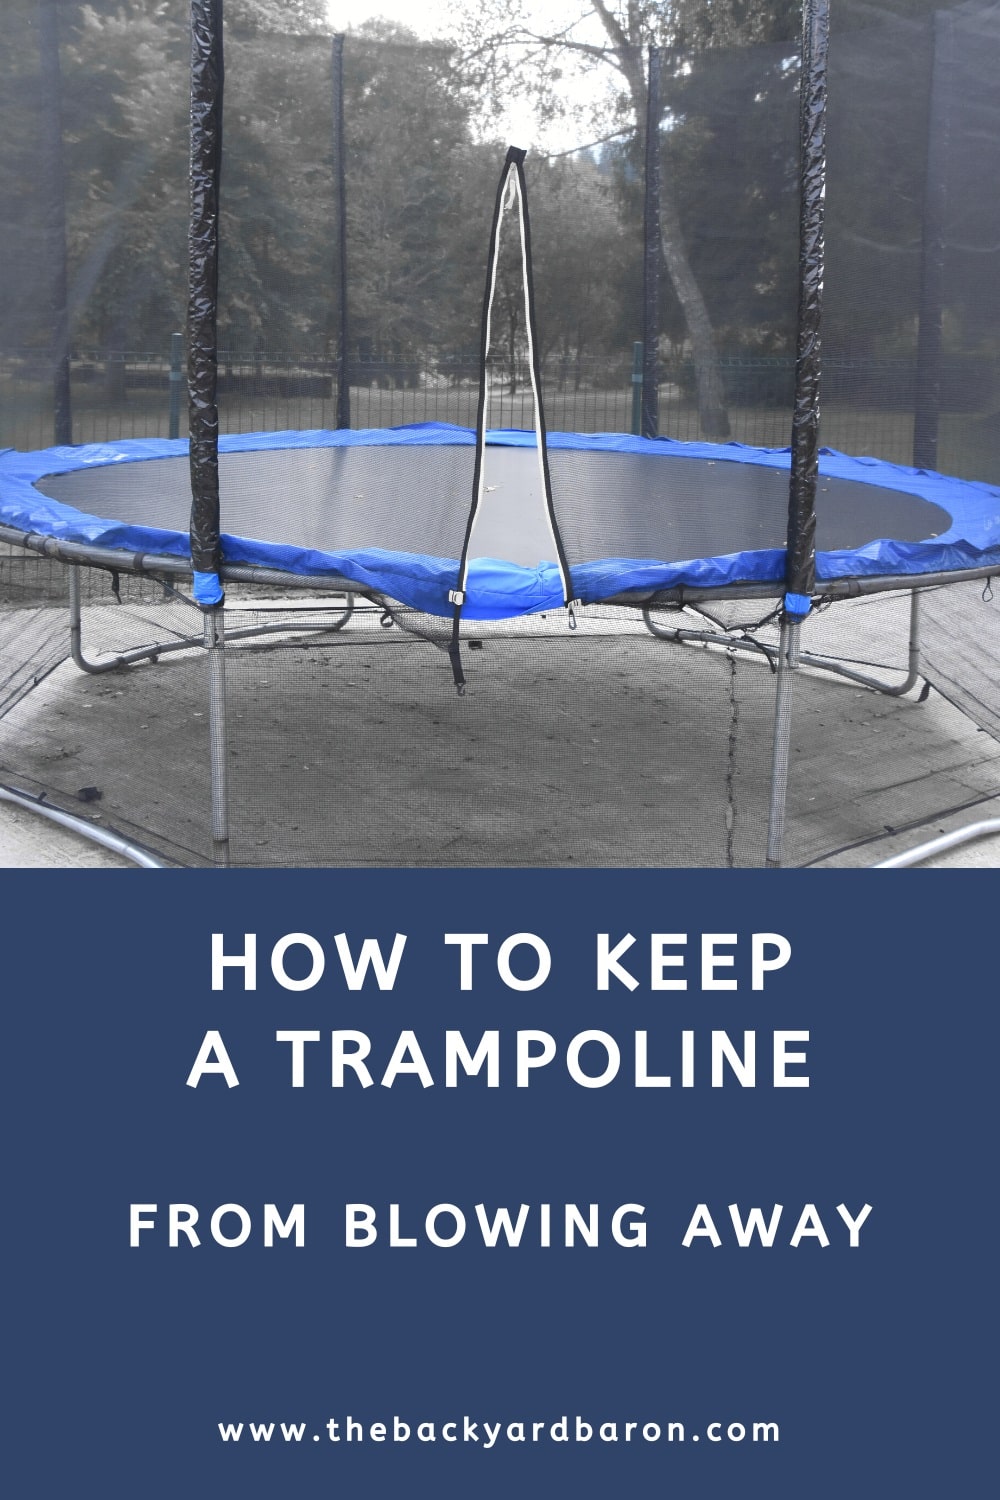 How to keep a trampoline from blowing away